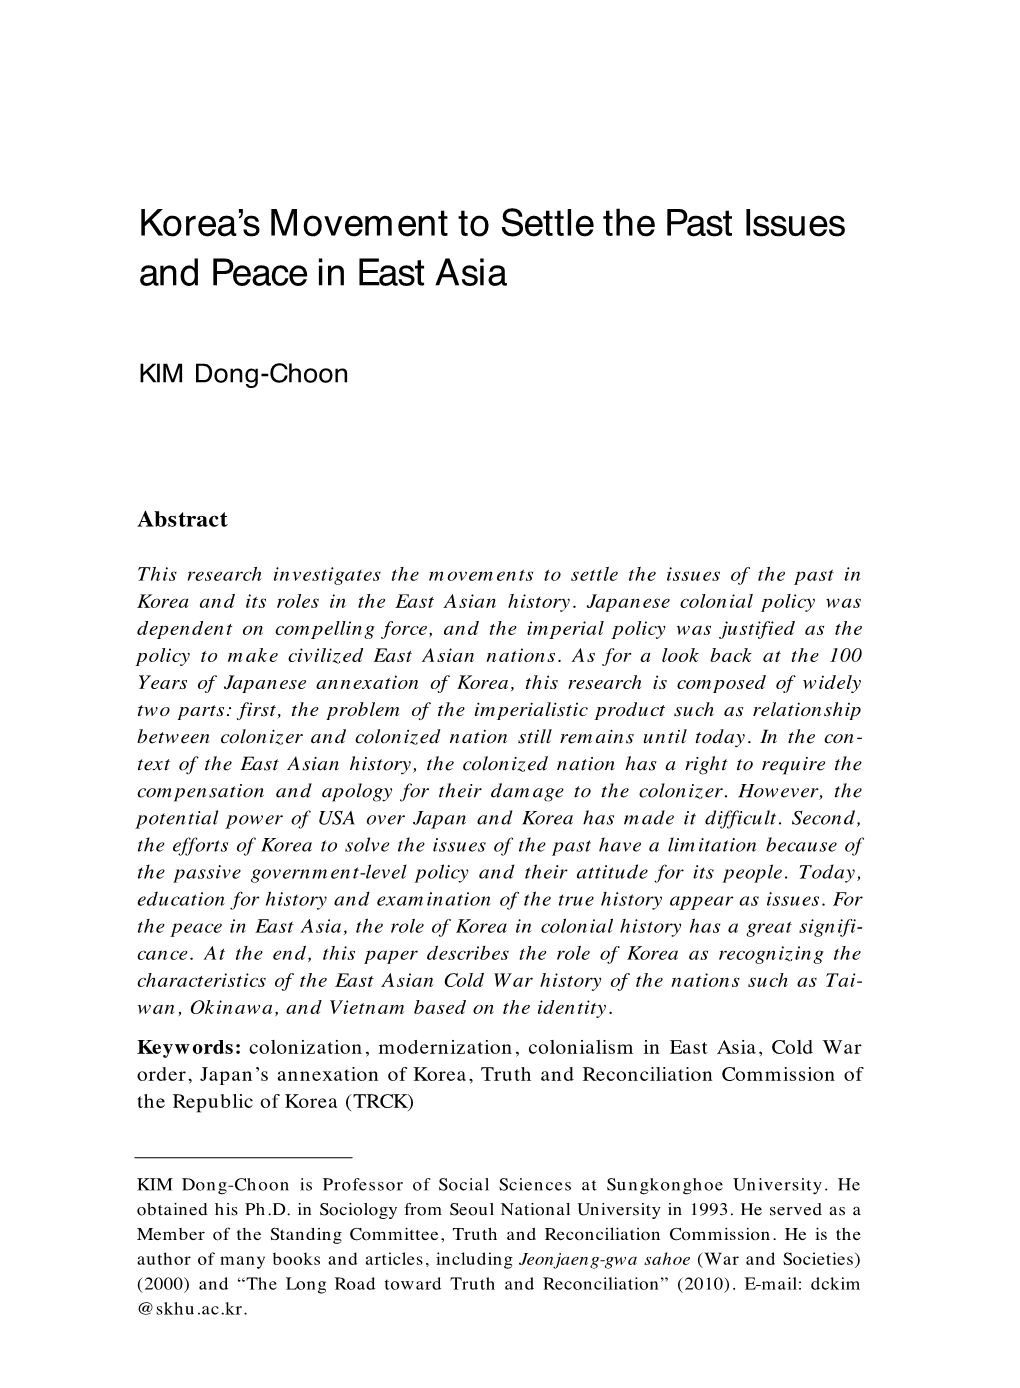 Korea's Movement to Settle the Past Issues and Peace in East Asia